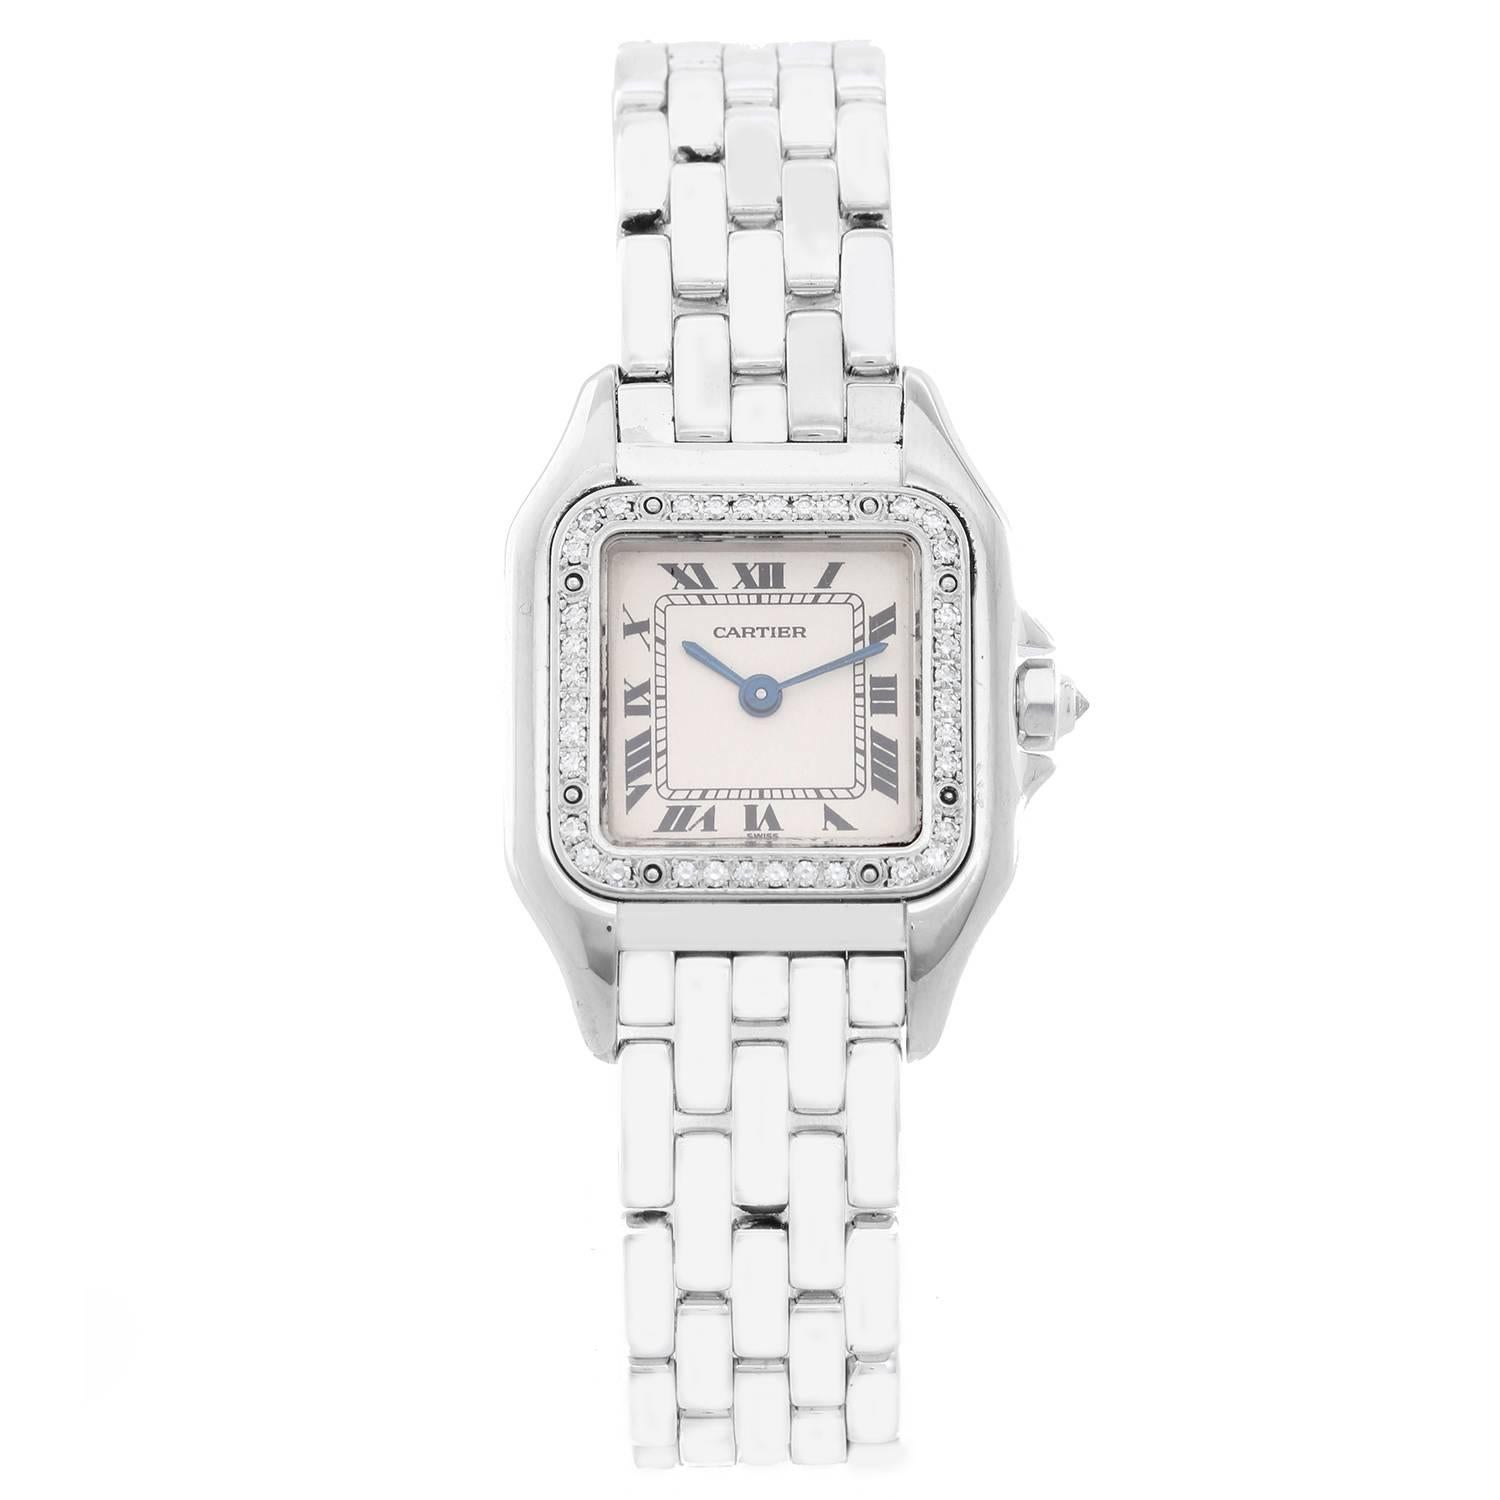 Cartier Panther 18K White Gold with Diamond Bezel WF3091F3 -  Quartz. 18K White Gold ( 22 mm x 22 mm ) with diamond bezel. Ivory dial with blue hands; Roman numerals. 18K White Gold bracelet. Pre-owned with Cartier box and books.